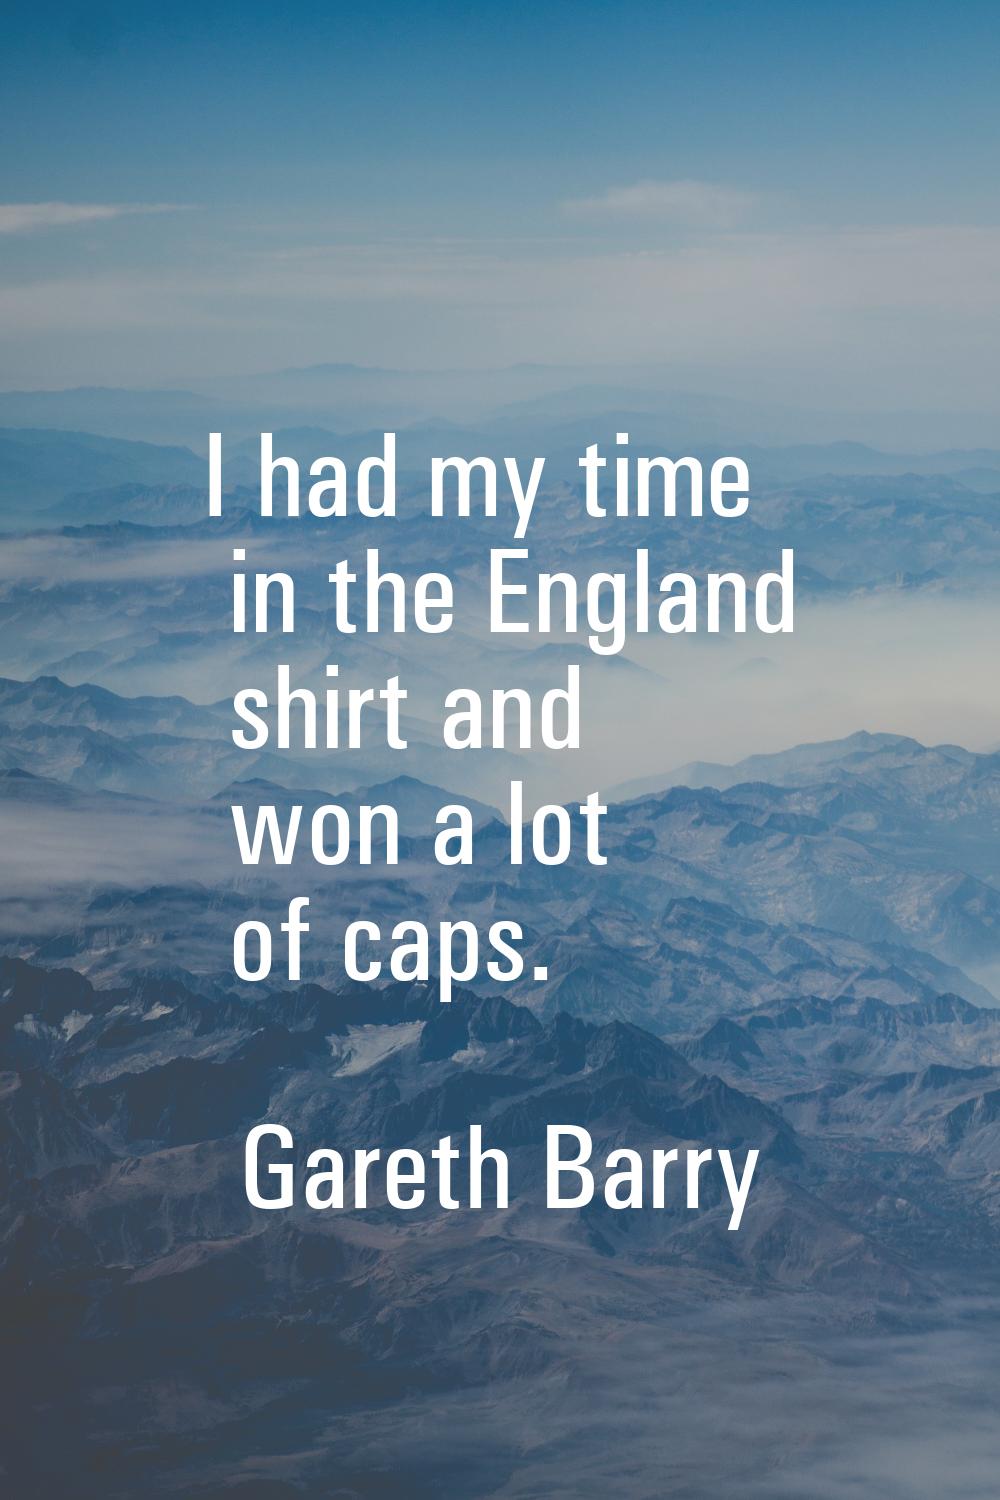 I had my time in the England shirt and won a lot of caps.